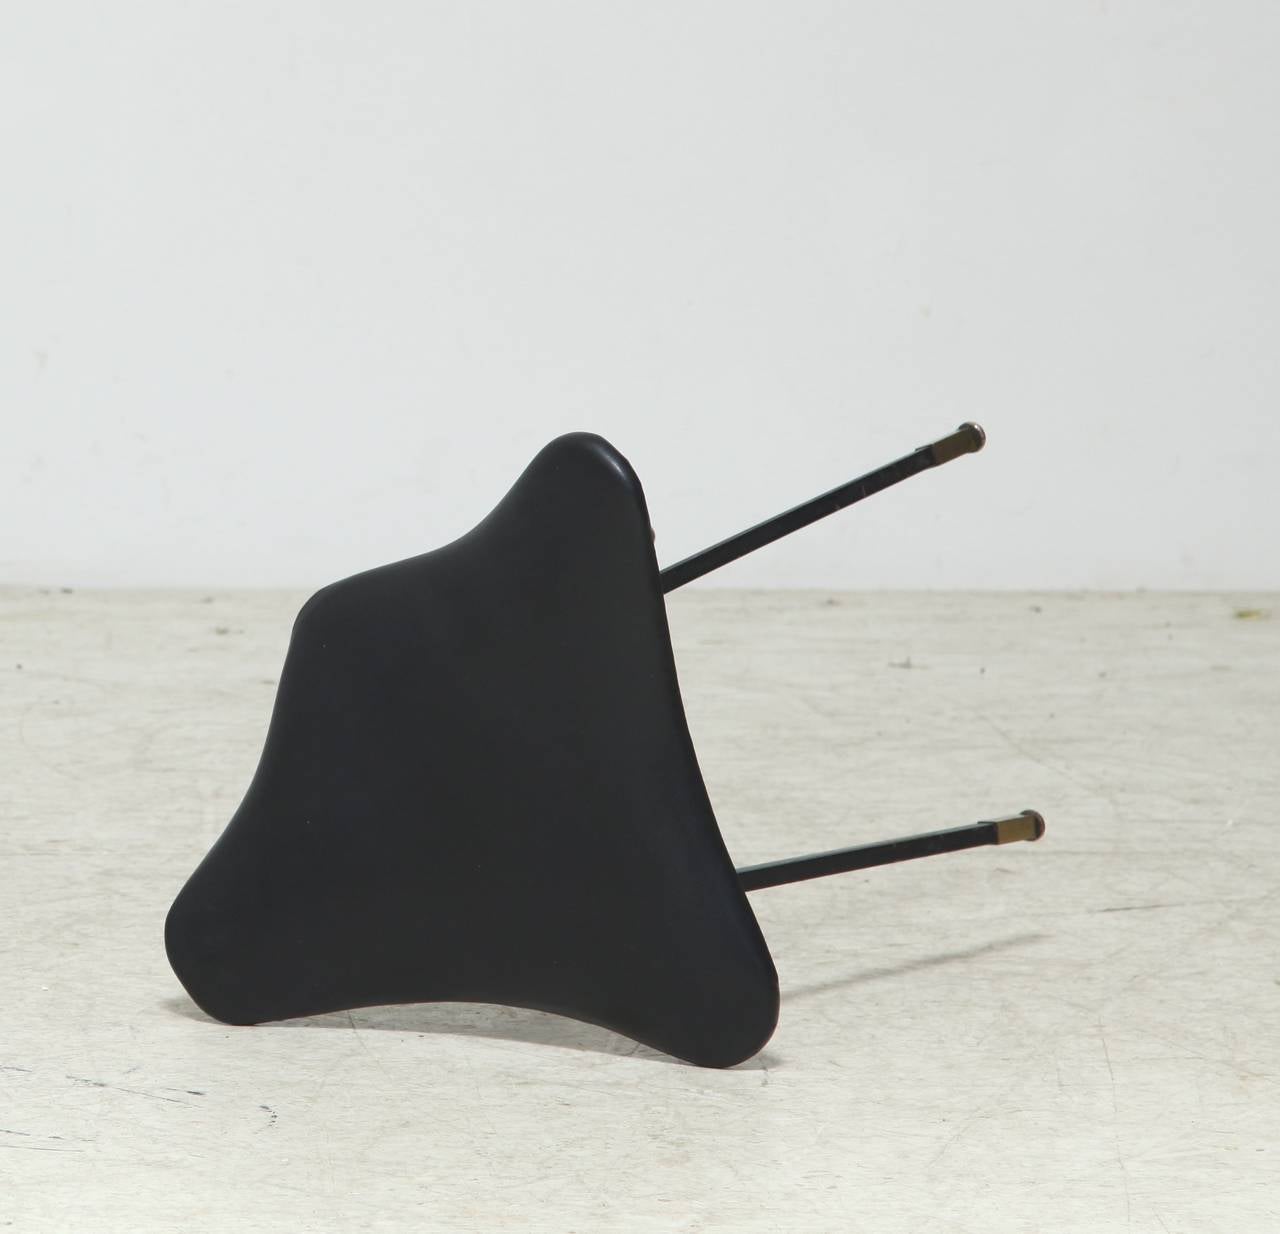 A small Jacques Quinet tripod stool, made of metal legs with brass feet and a saddle-shaped seating made of slightly bent wood with a black leather upholstery.